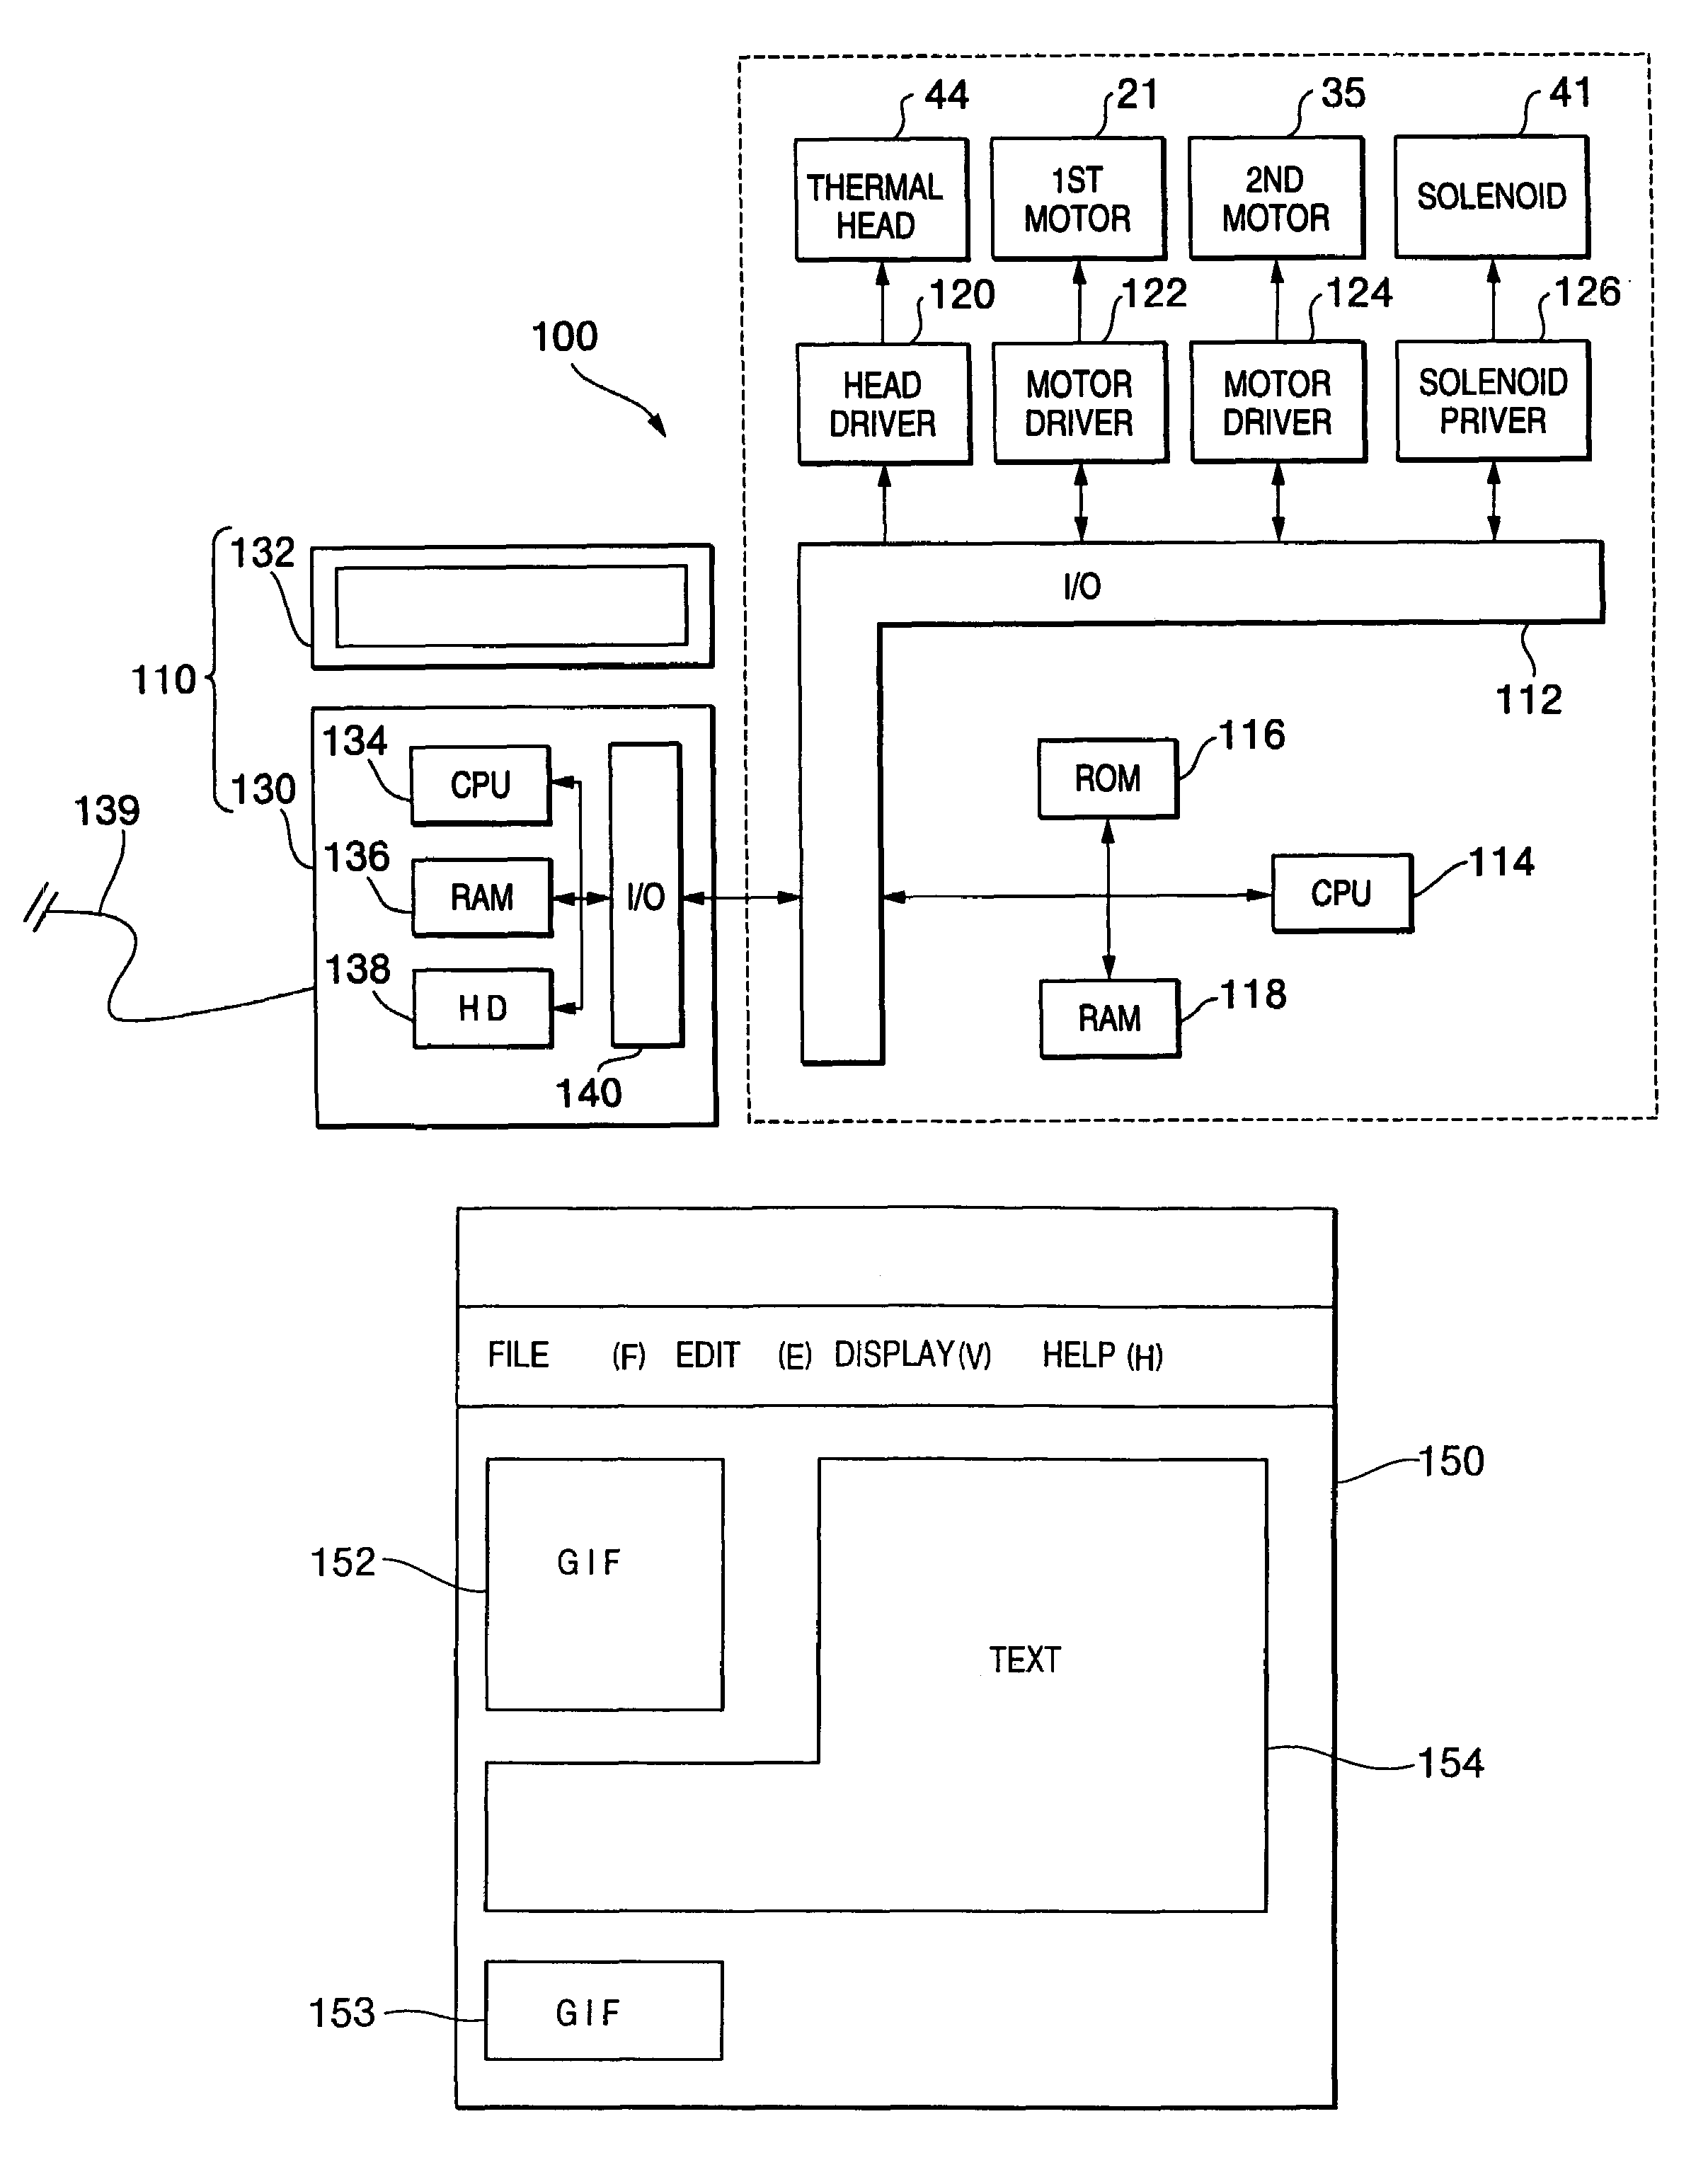 Data processing for arranging text and image data on a substrate